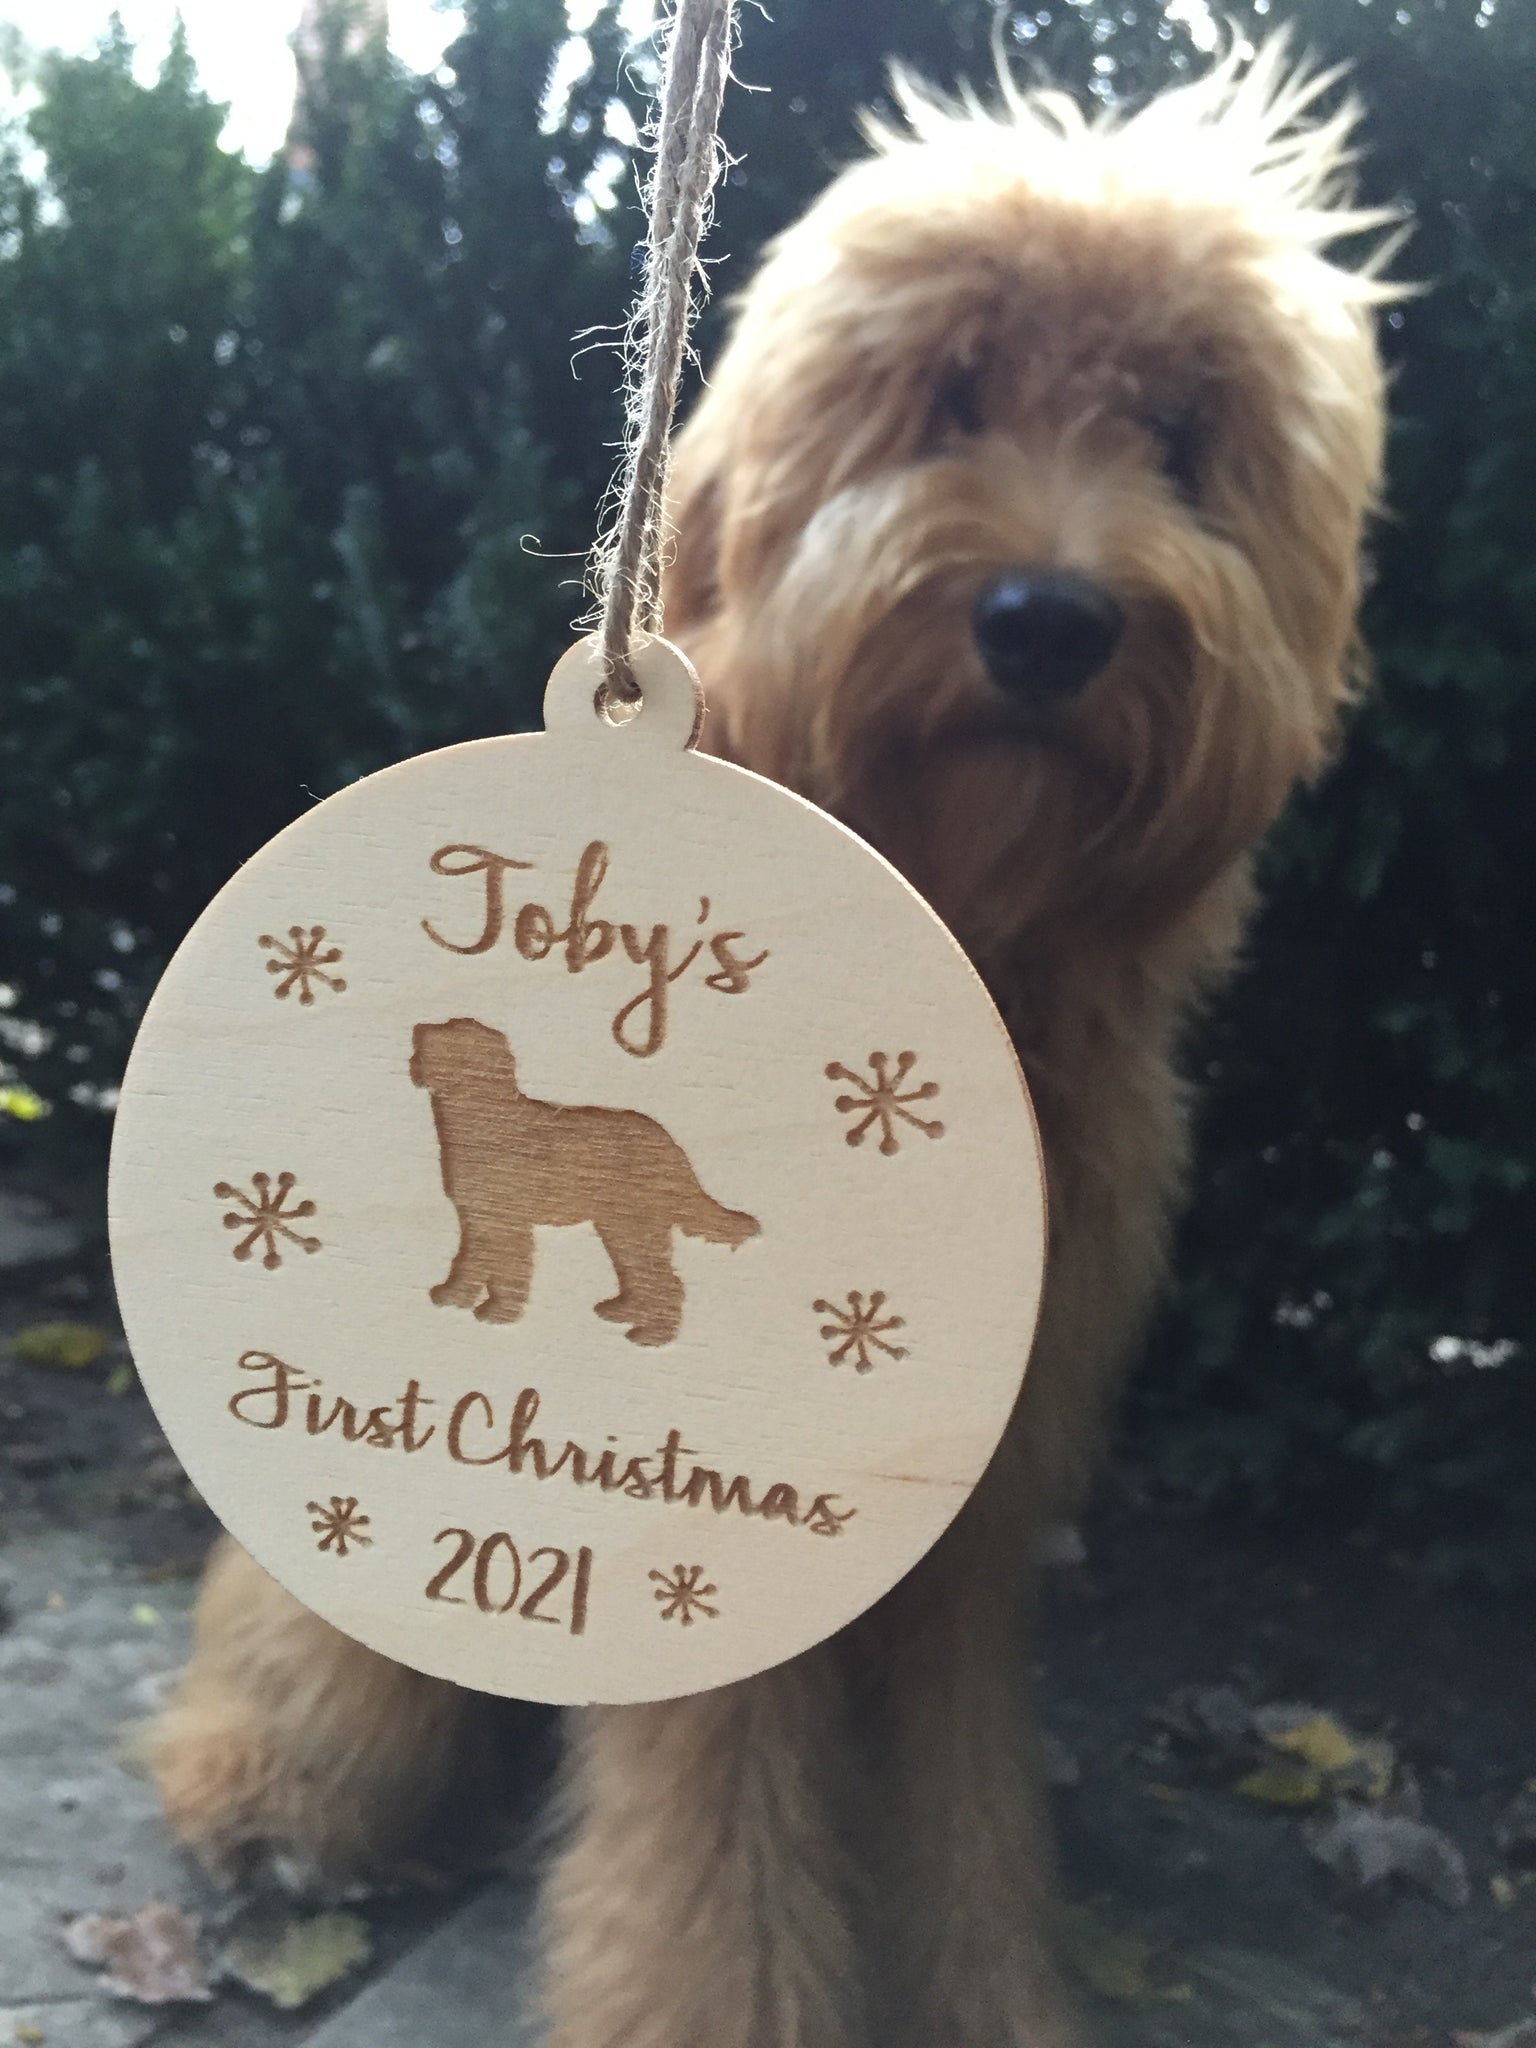 Puppy's First Christmas Dog Christmas Tree Ornament Doodle Custom Ornament New Pet Owners Gift Stocking Stuffer goldendoodle doodle ornament